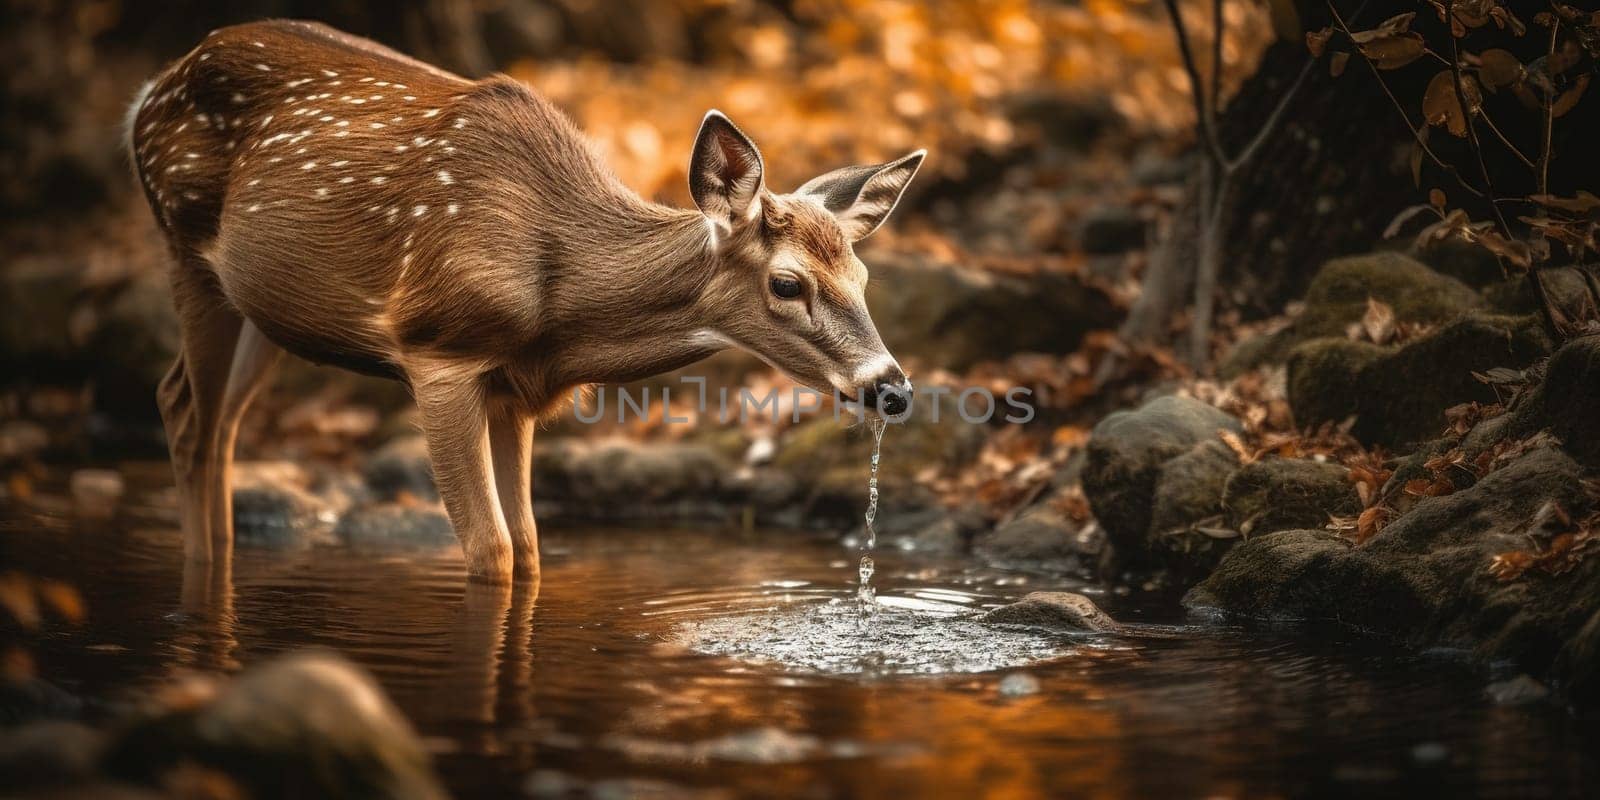 Young Deer Drinks Water From Puddle In The Forest by tan4ikk1